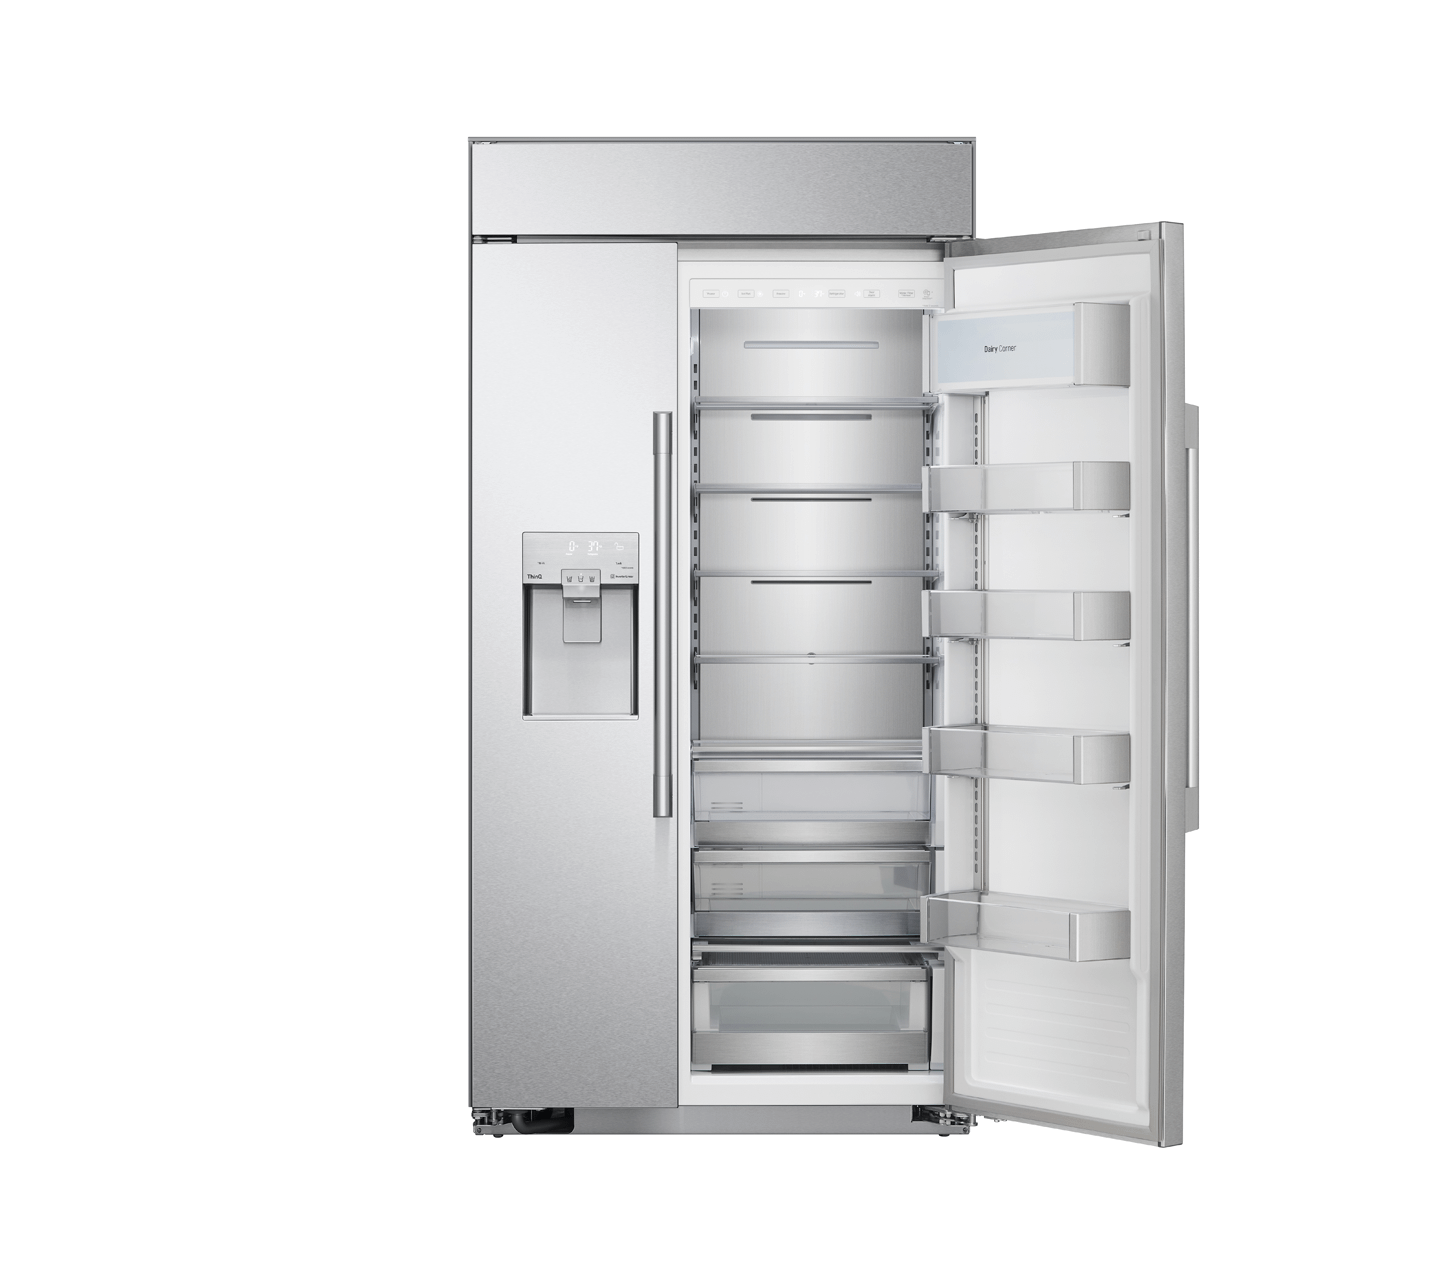 Signature Kitchen Suite SKSSB4202S 42-Inch Built-In Side-By-Side Refrigerator